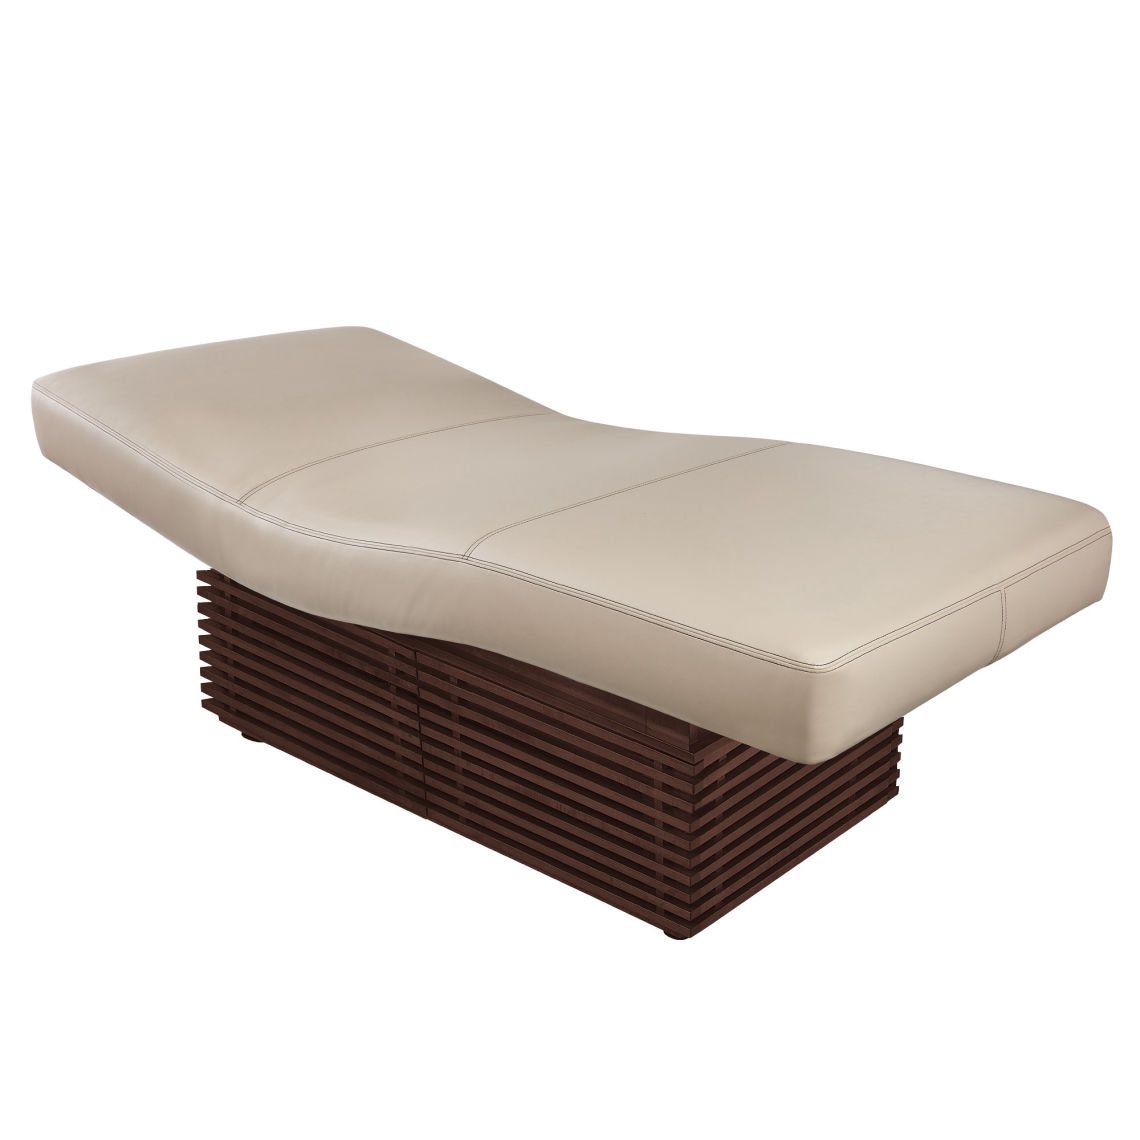 Spavision | Insignia Modern™ Multi-purpose treatment table with replaceable mattress